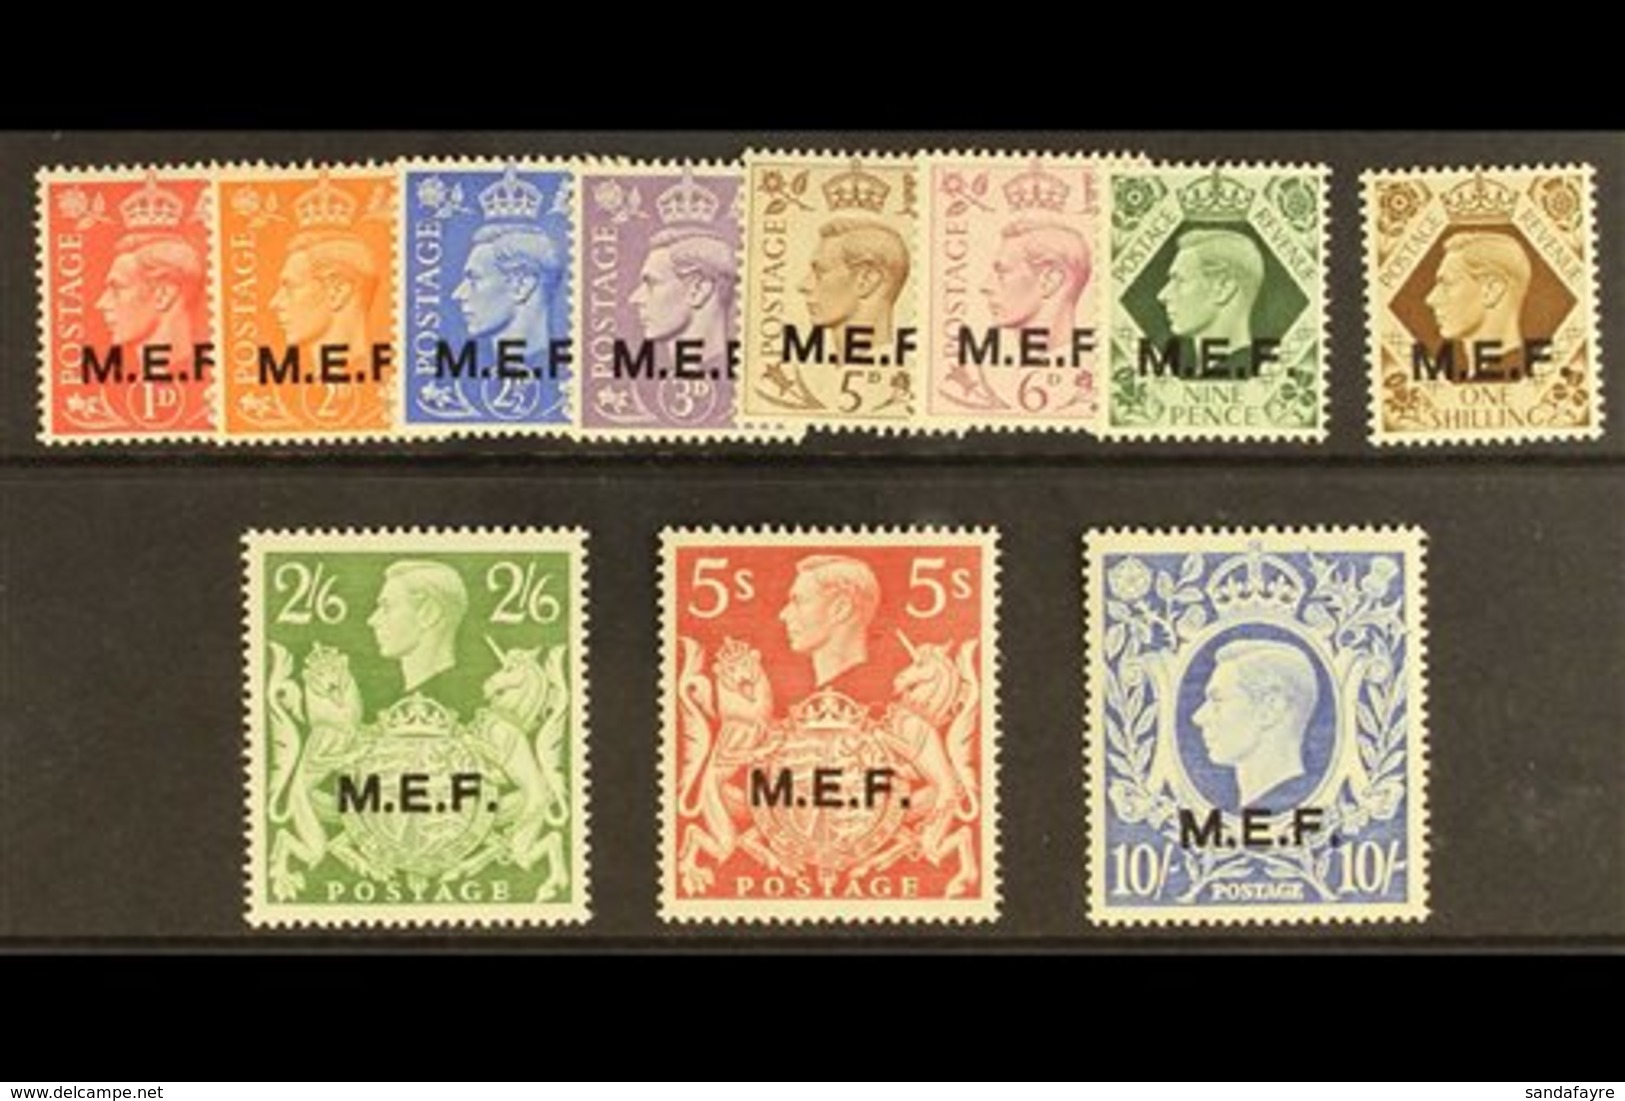 MIDDLE EAST FORCES 1943-47 "M.E.F." Overprints Complete Set, SG M11/M21, Never Hinged Mint. (11 Stamps) For More Images, - Italian Eastern Africa